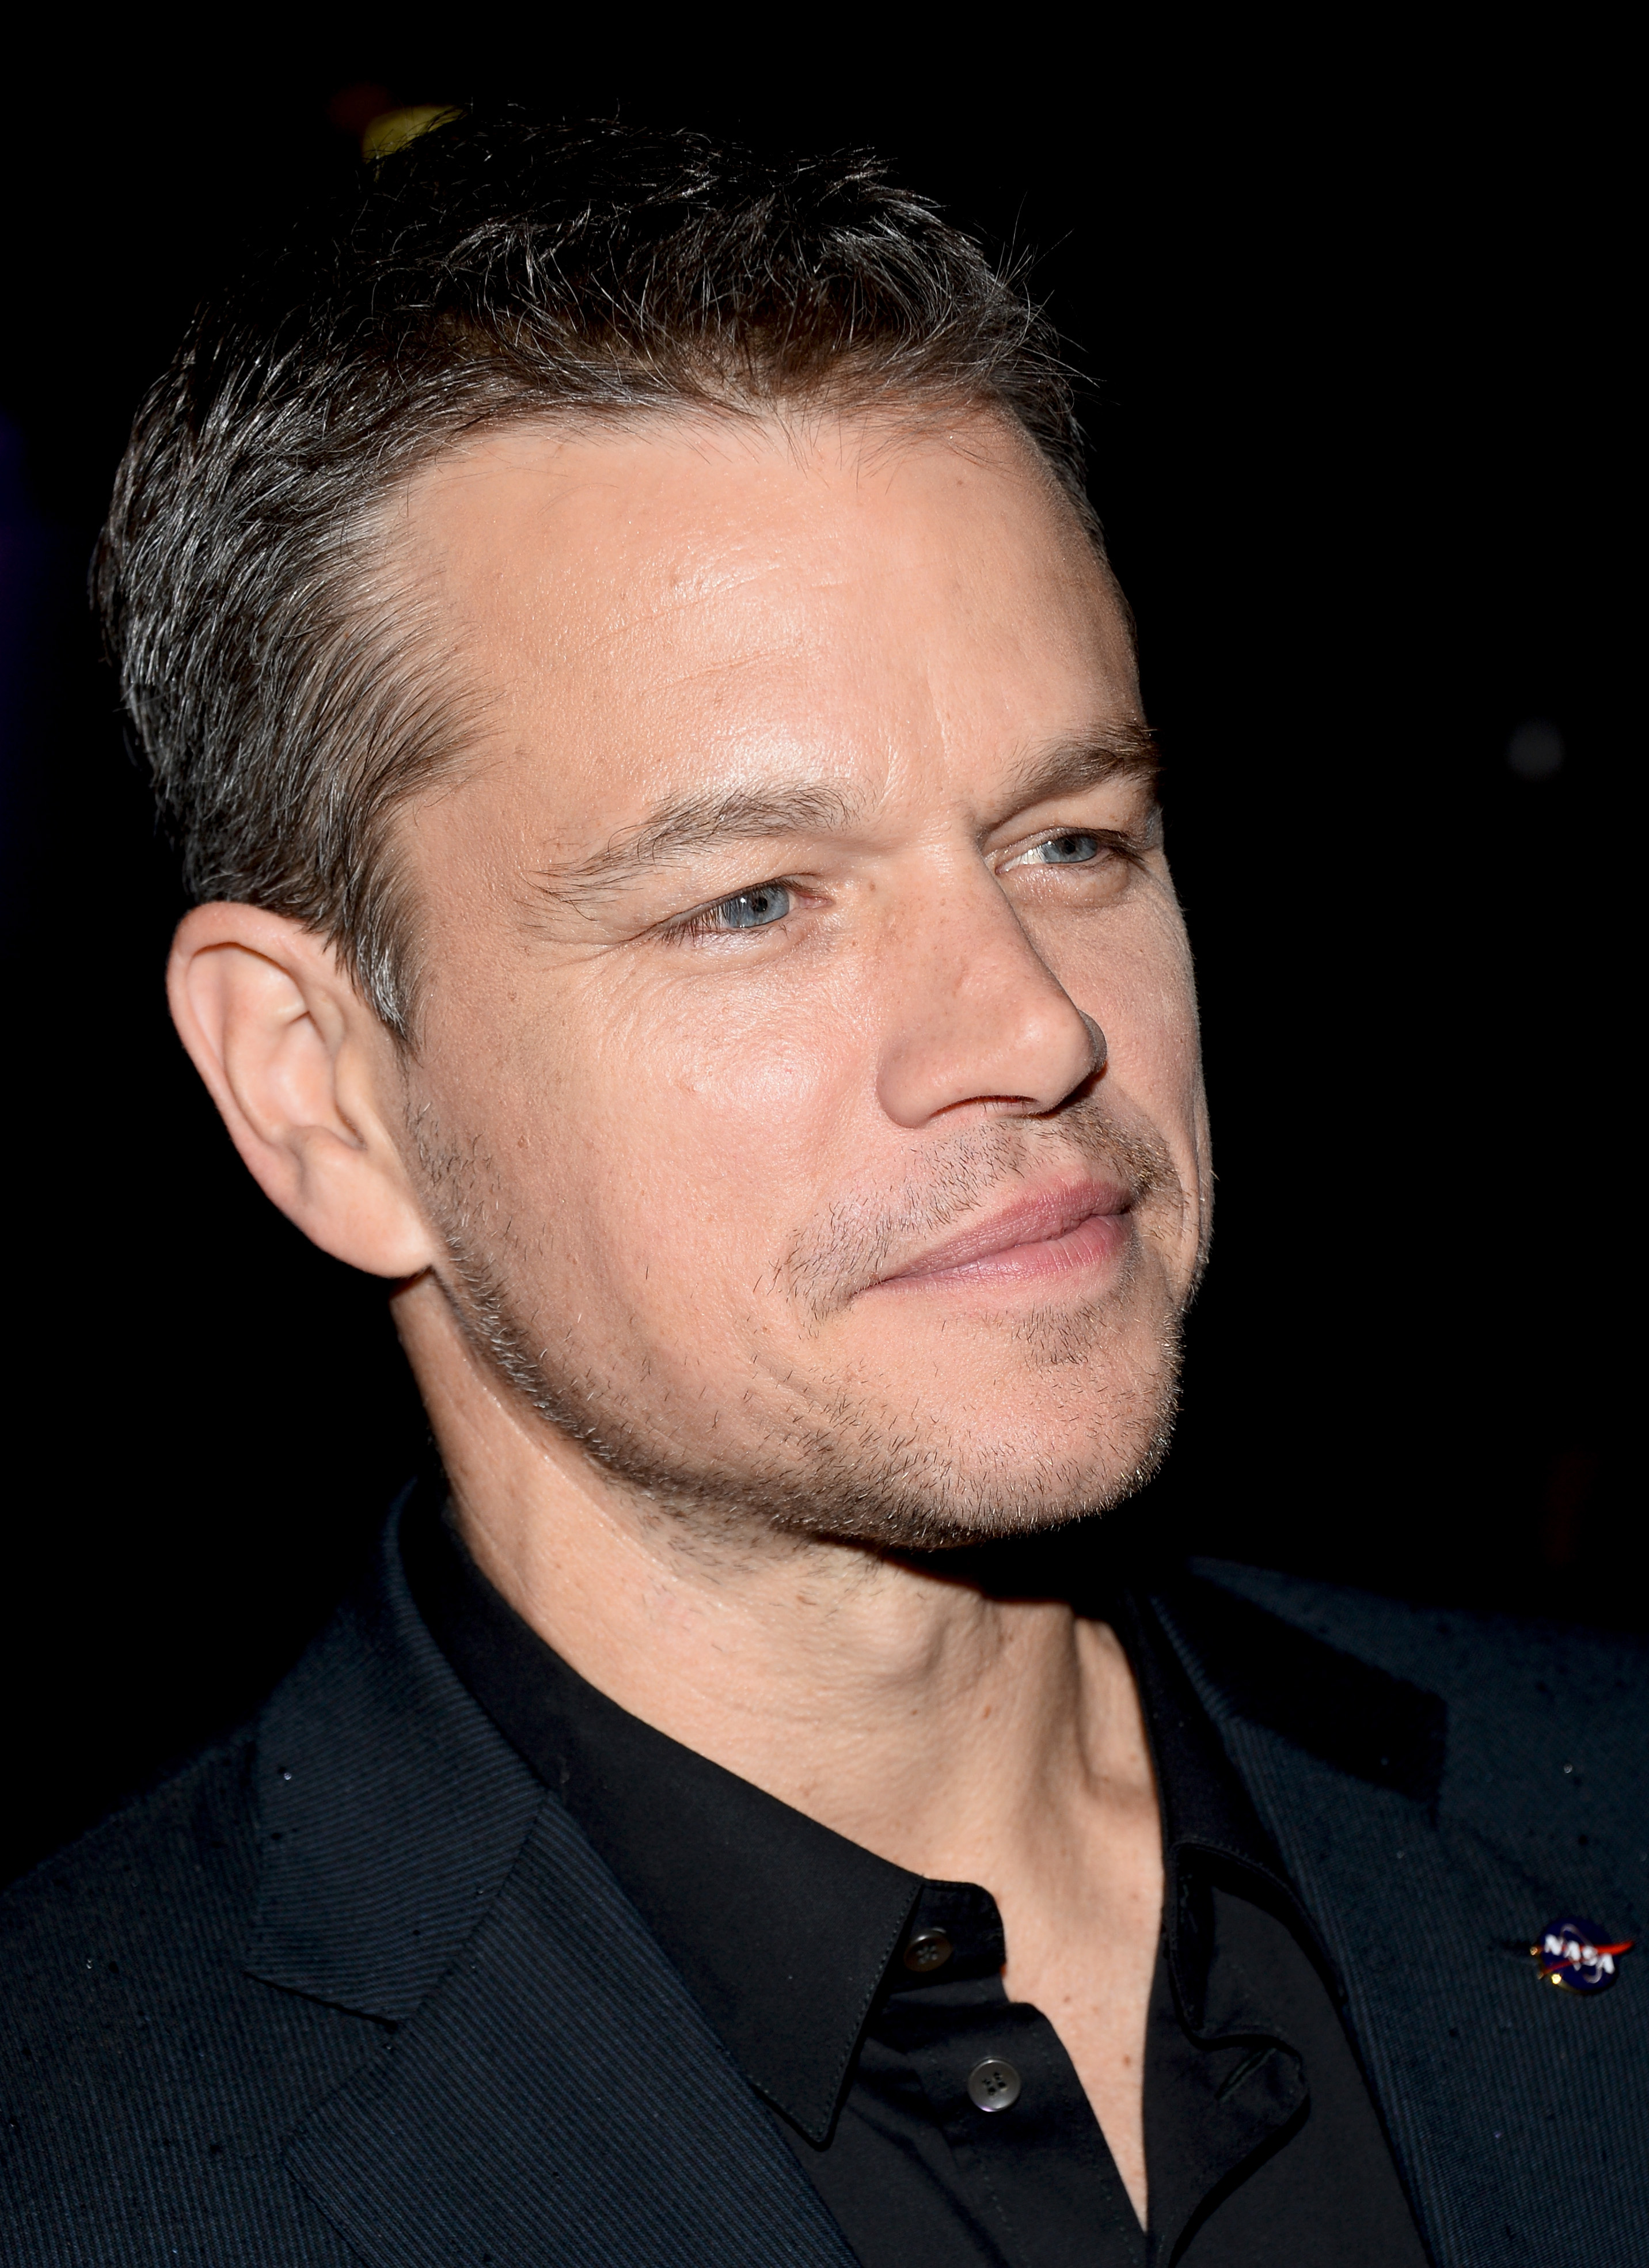 Matt Damon at the "The Martian" premiere during the 2015 Toronto International Film Festival in Toronto on Sept. 11, 2015. (Amanda Edwards—WireImage/Getty Images)